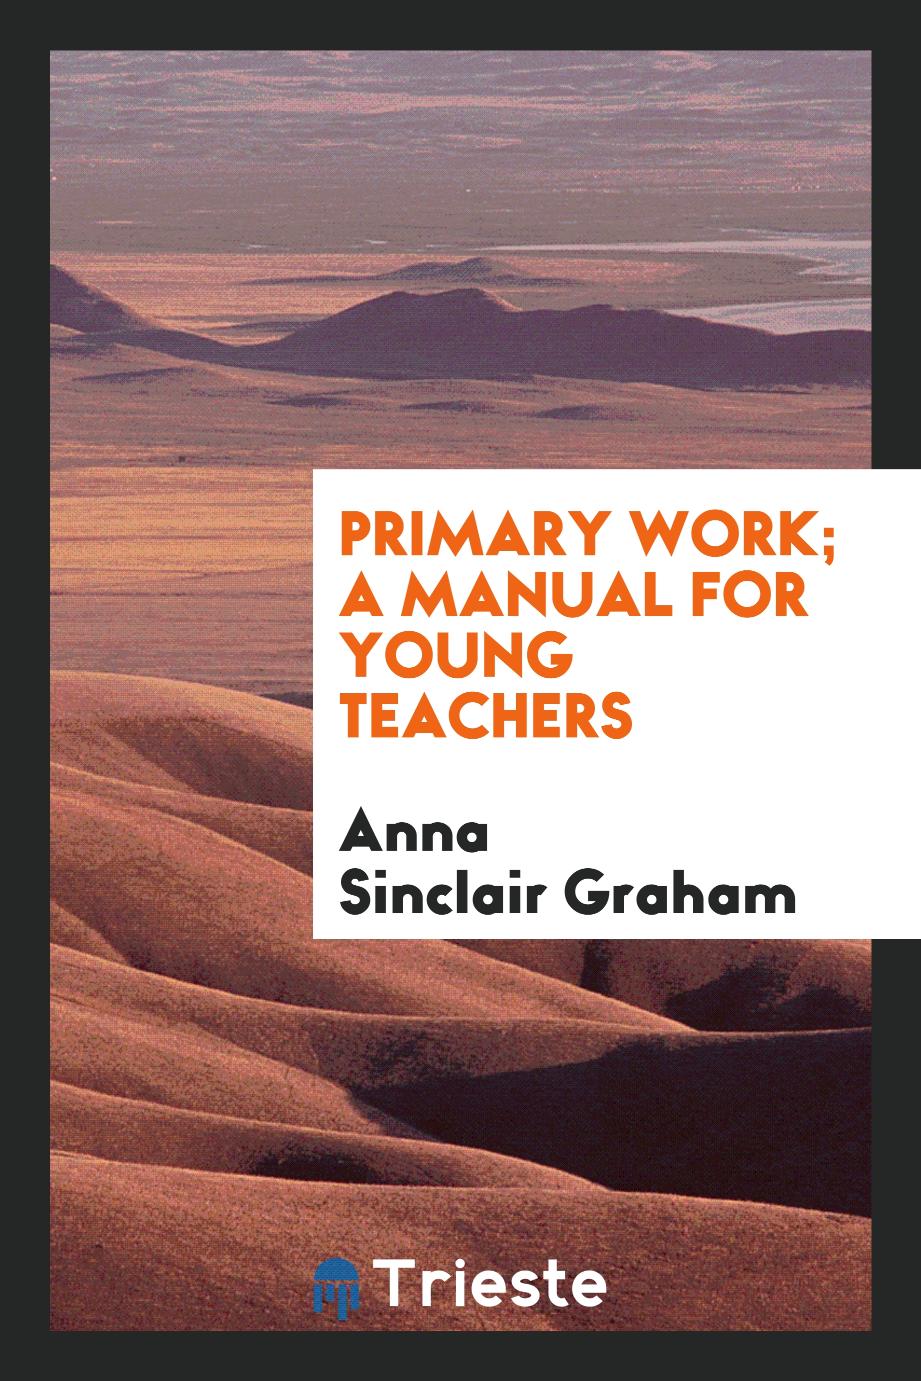 Primary work; a manual for young teachers